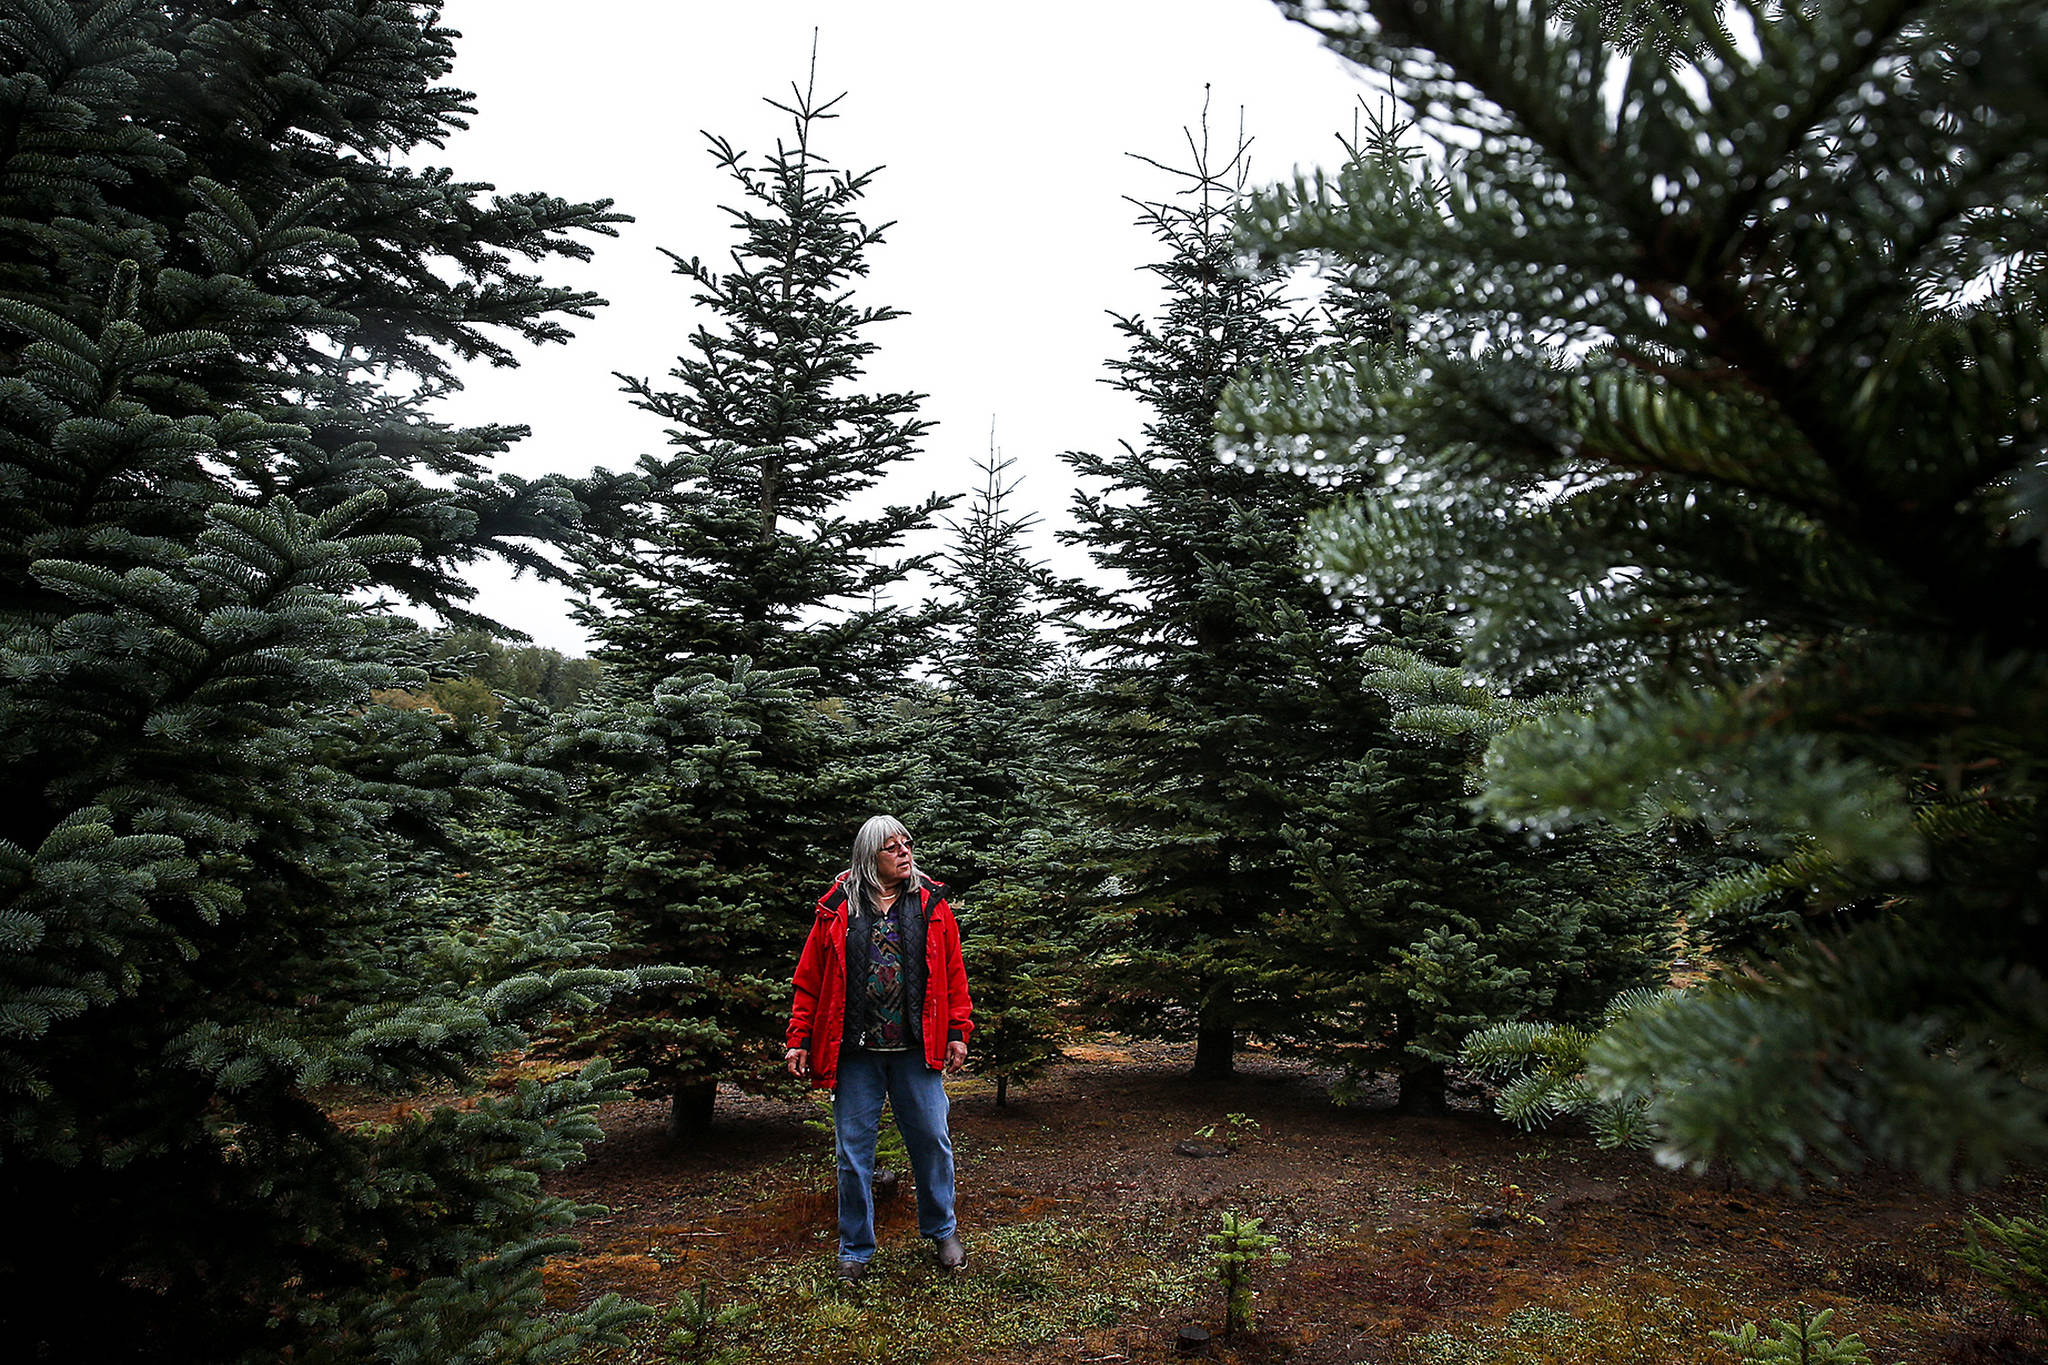 Lanai Hemstrom walks through rows of trees at her Hemstrom Valley Tree Farm in Granite Falls on Tuesday. Hemstrom’s trees have been affected by the record dry weather over the summer and have shed more needles than usual. (Ian Terry / The Herald)